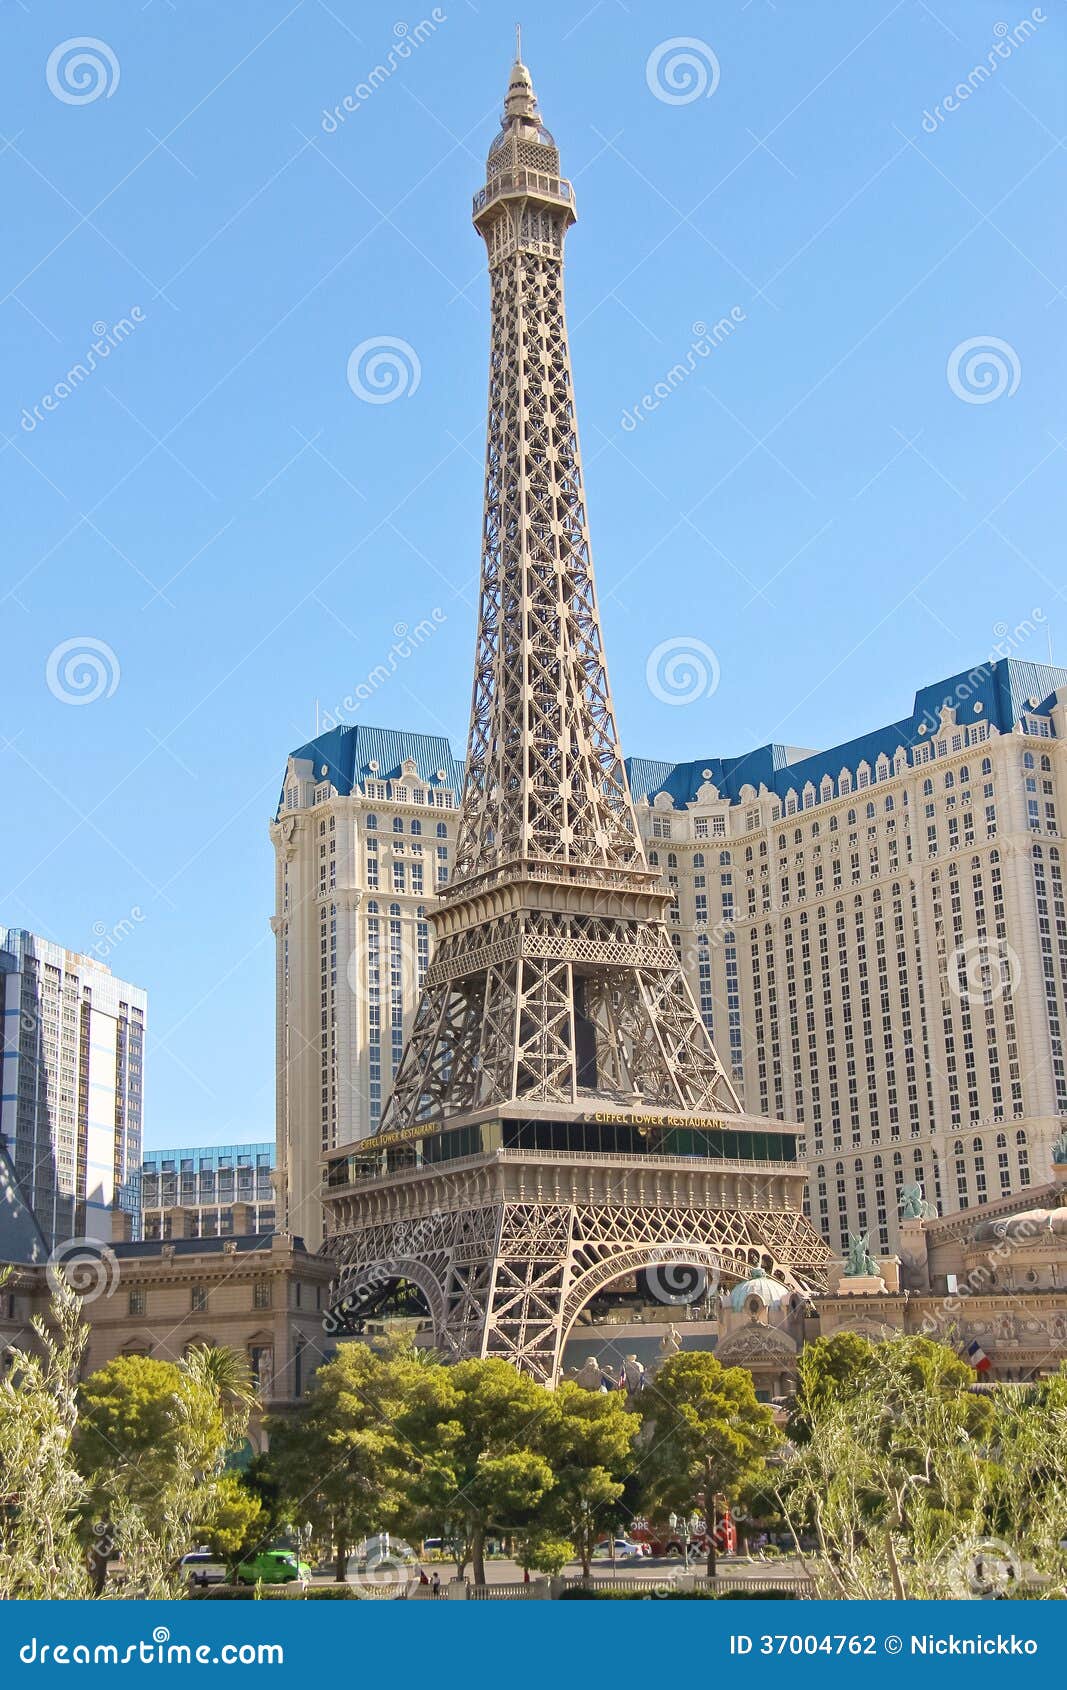 Replica Of Eiffel Tower At The Paris Hotel On Las Vegas Boulevard, Las Vegas,  Nevada Stock Photo, Picture and Royalty Free Image. Image 10770340.